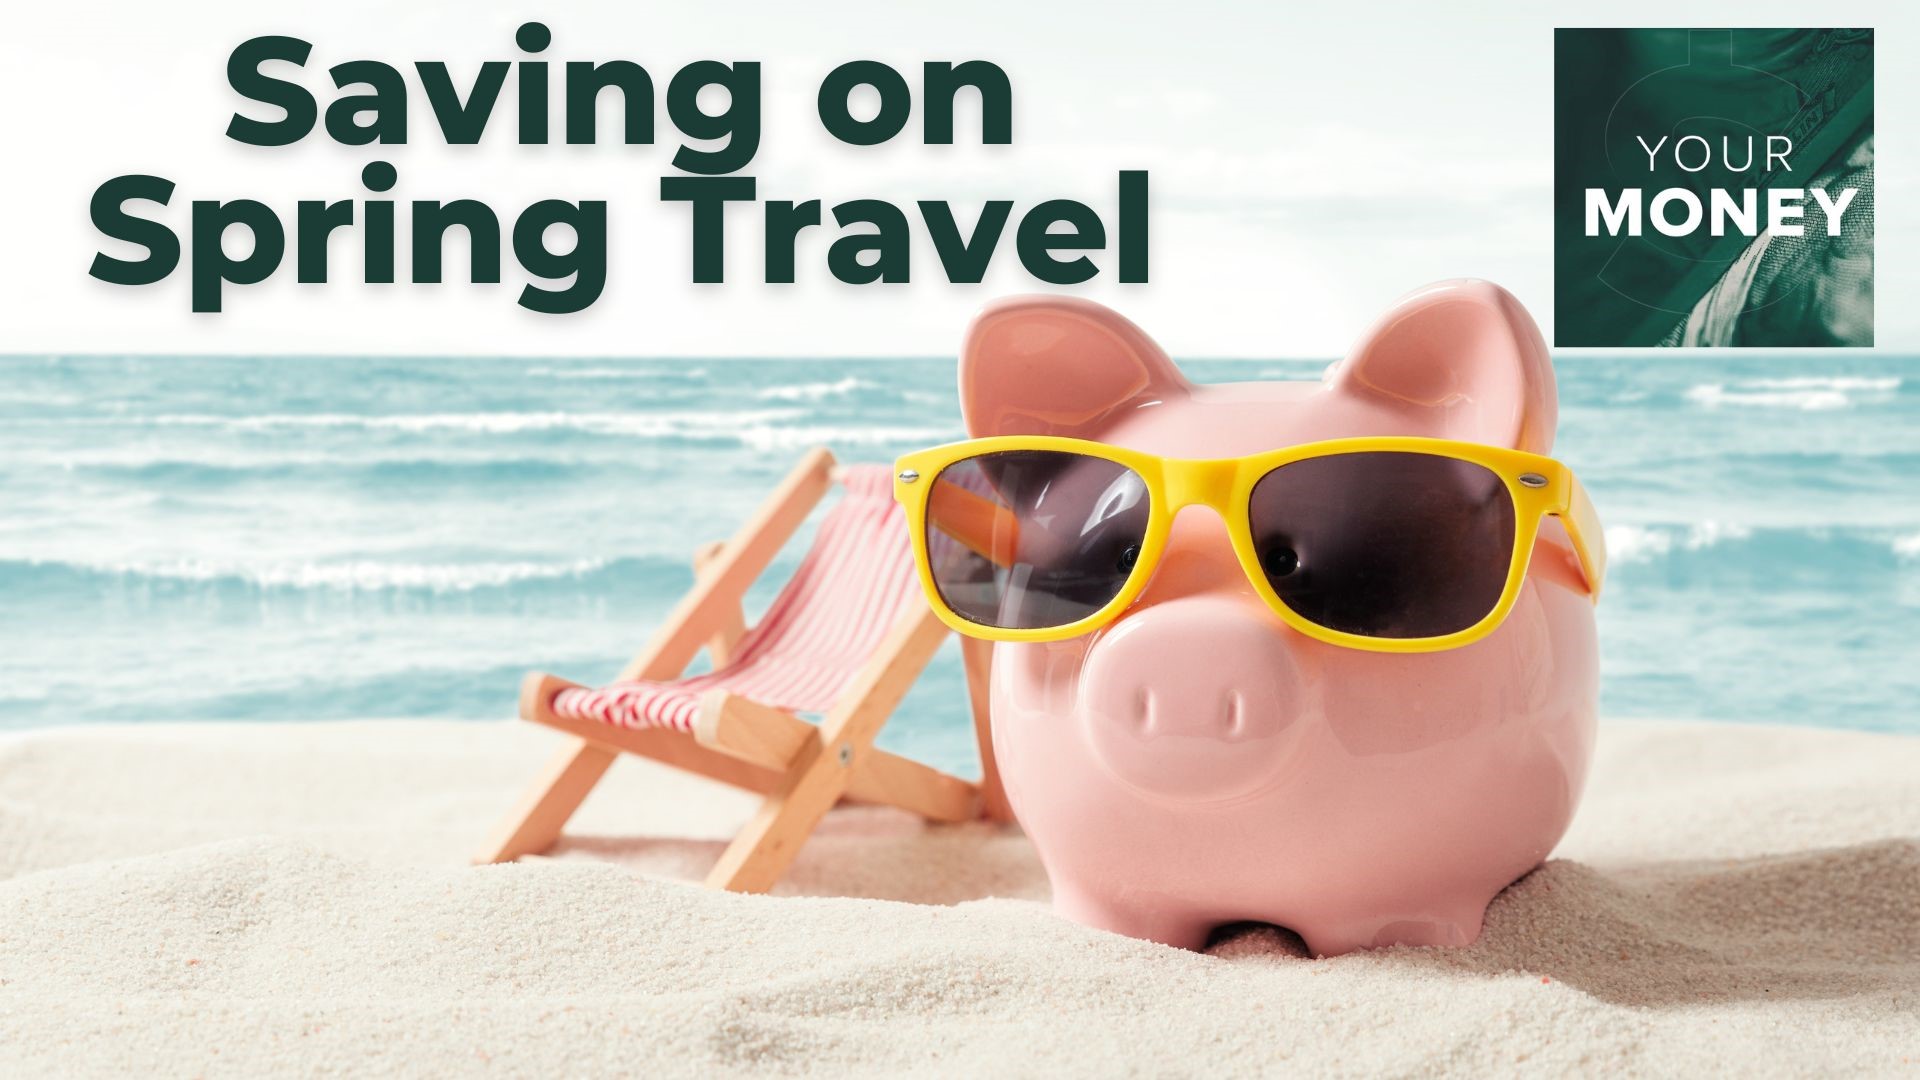 Gordon Severson shares some ways to save on your spring travel plans without breaking the bank, including how to use credit card rewards and unique ideas for trips.